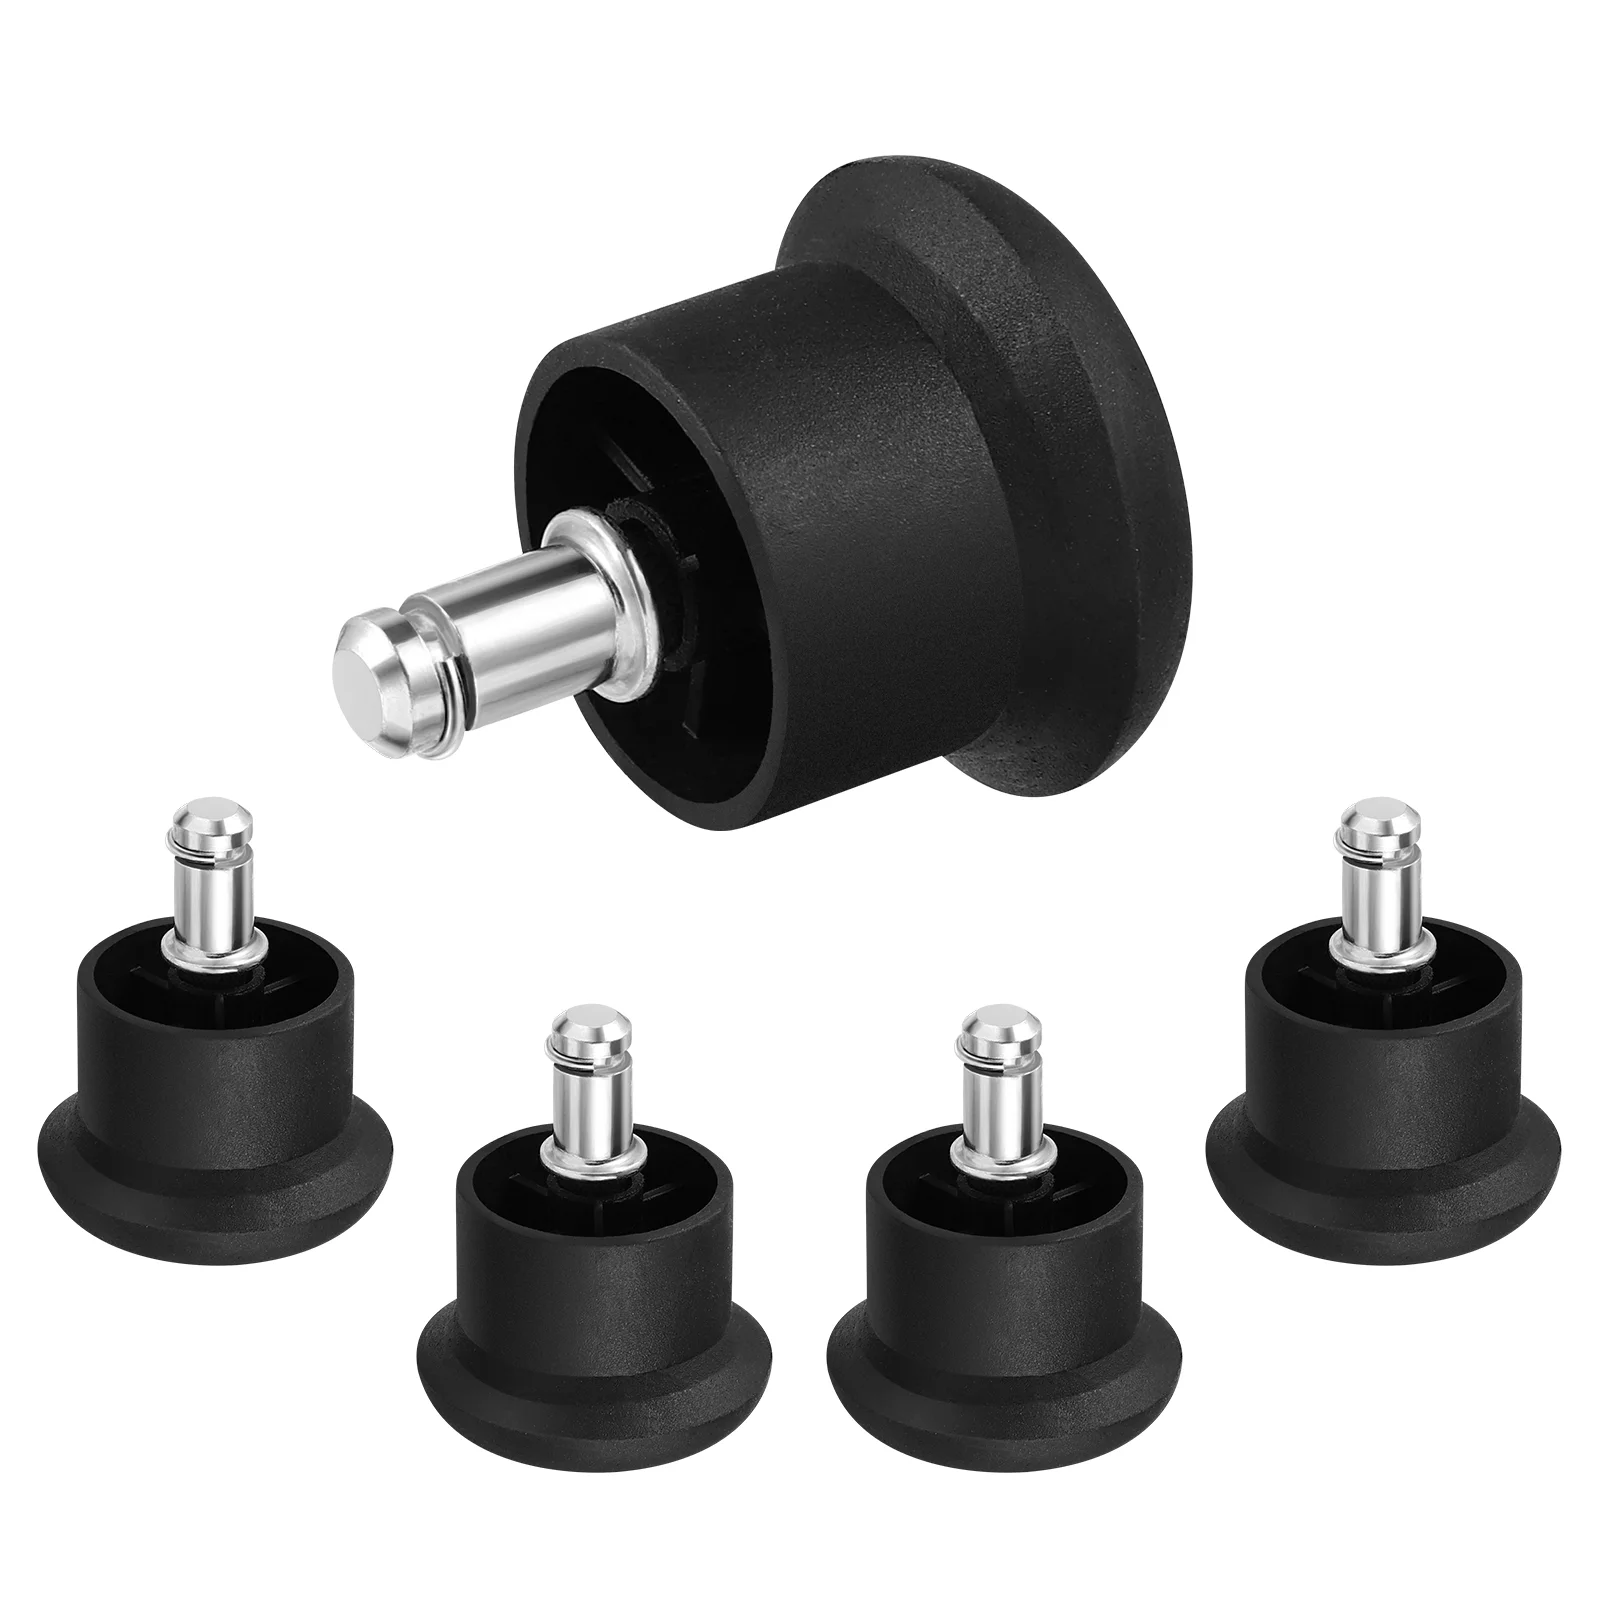 

Chair Wheels Casters Office Stopper Caster Glides Fixed Chairs Carpetwheel Castors Accessories Foot Desk Stationary Heavy Duty